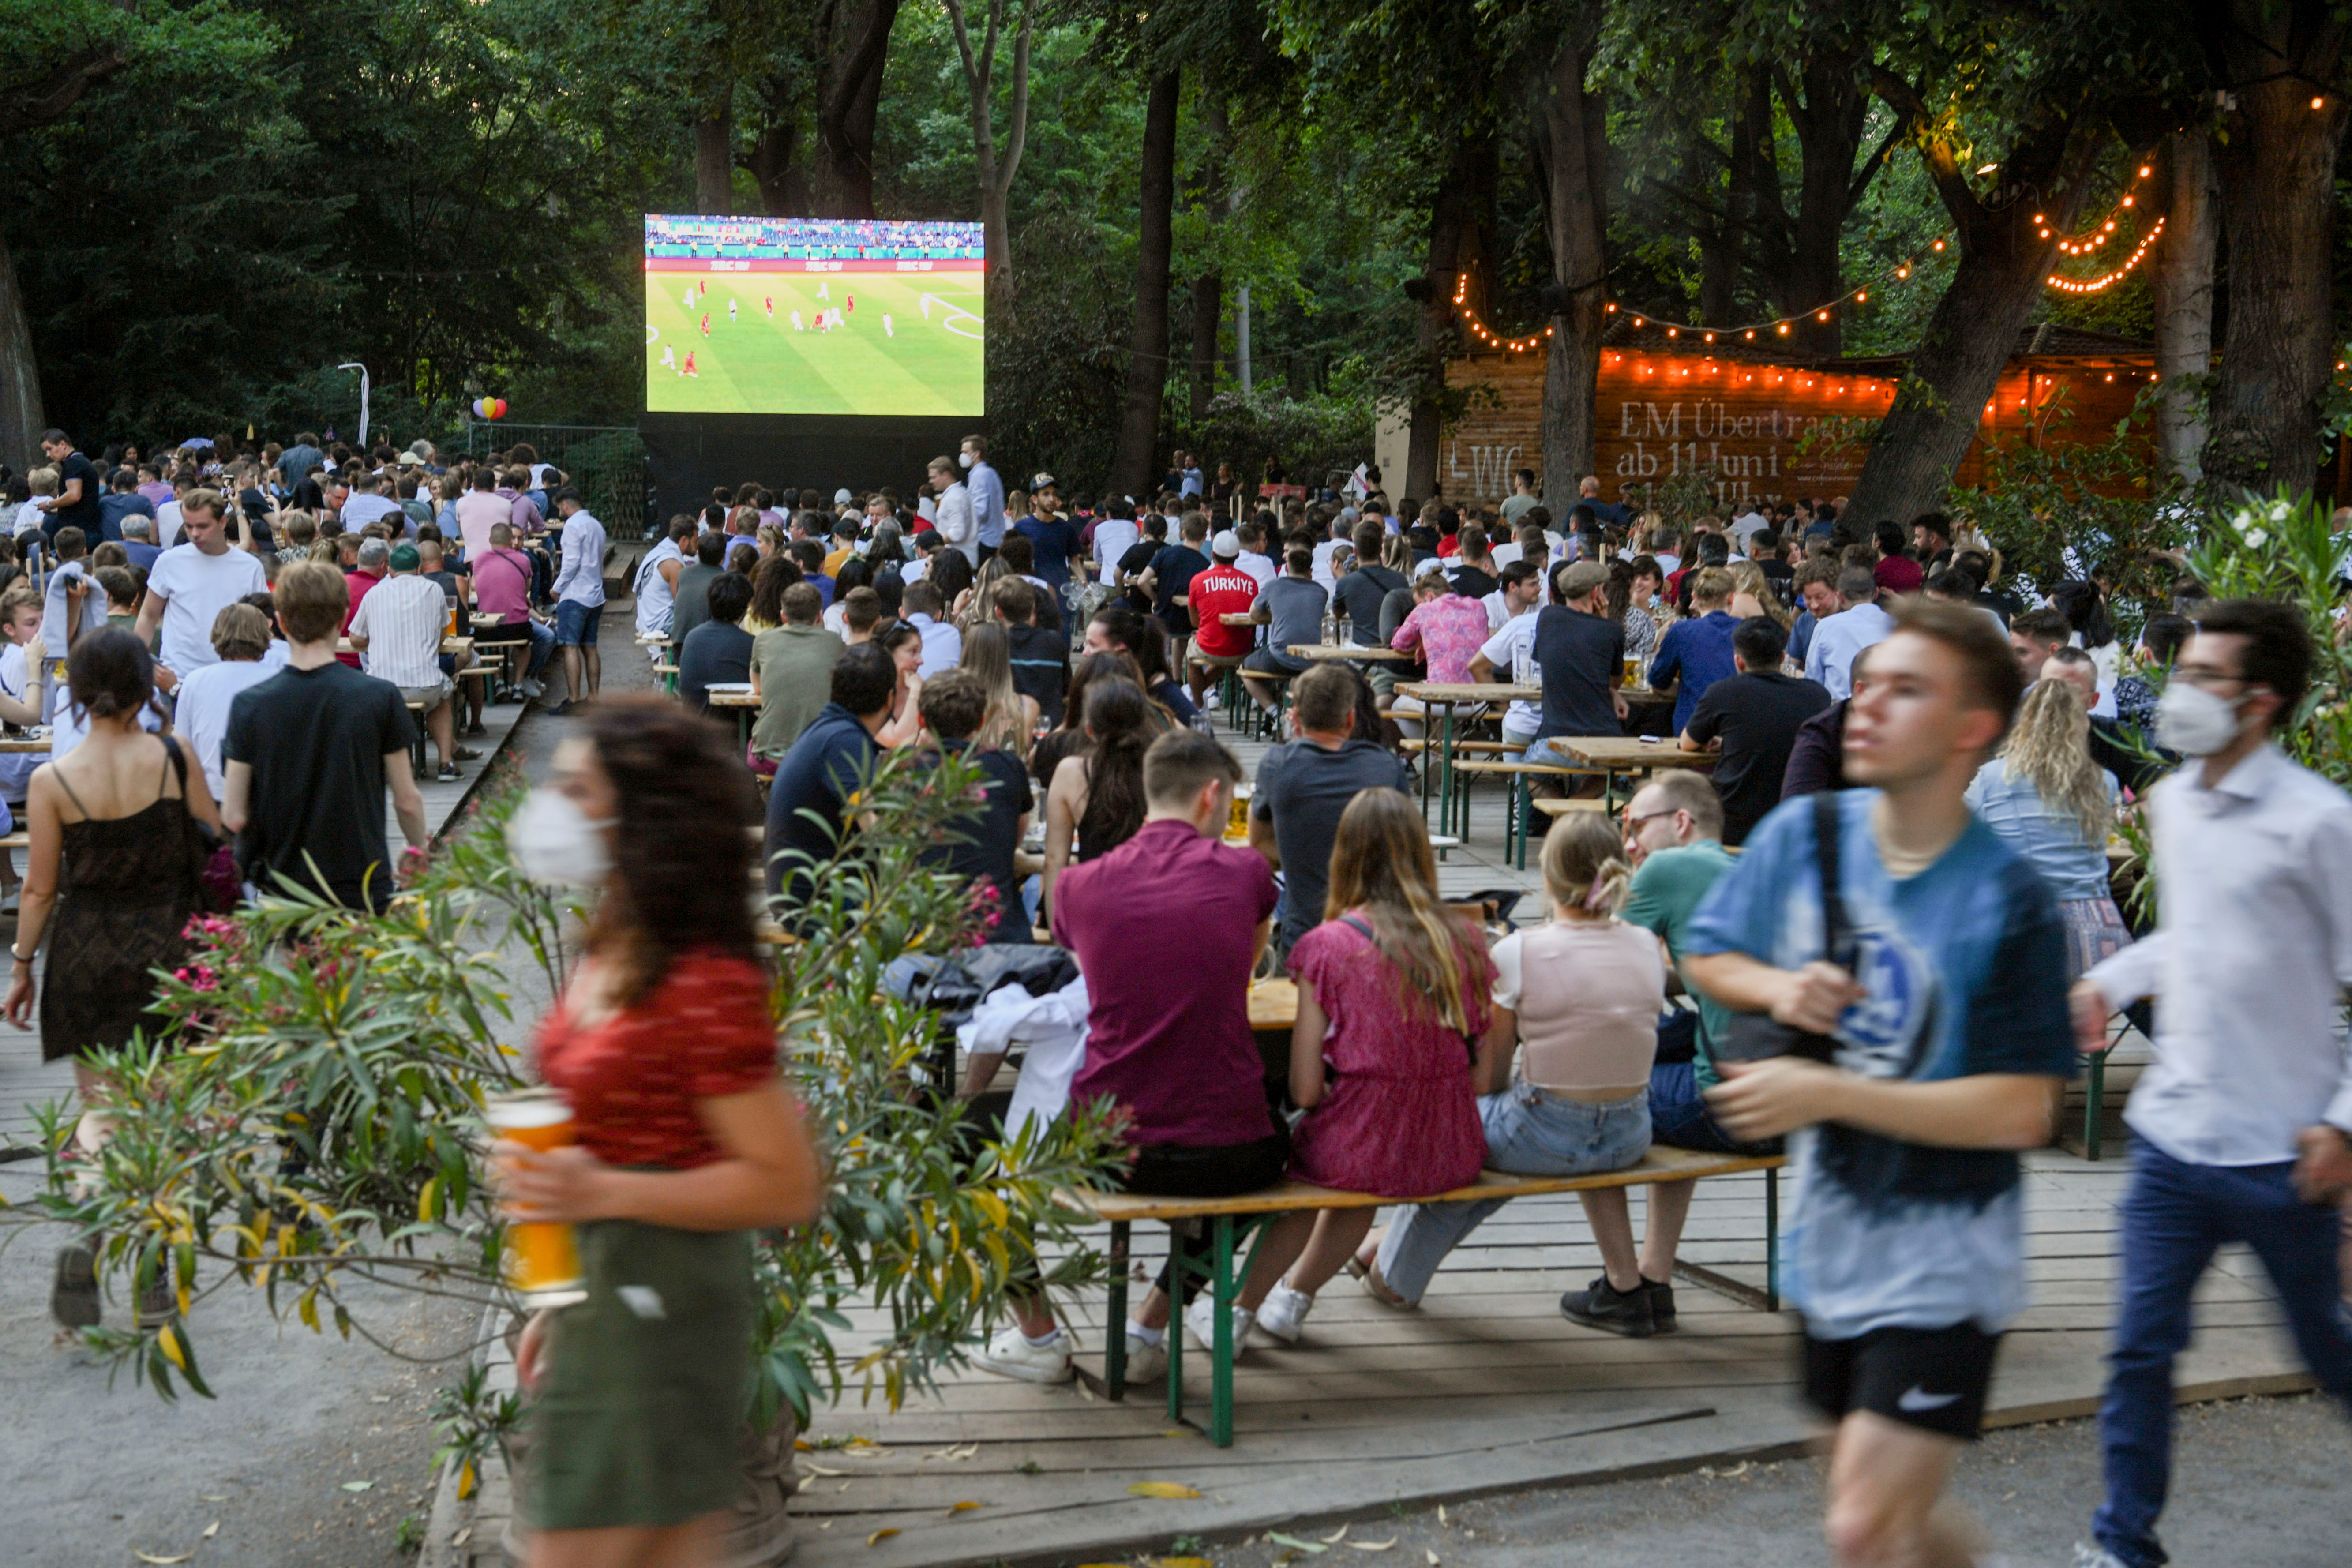 People watch the EURO 2020 opening match in Berlin